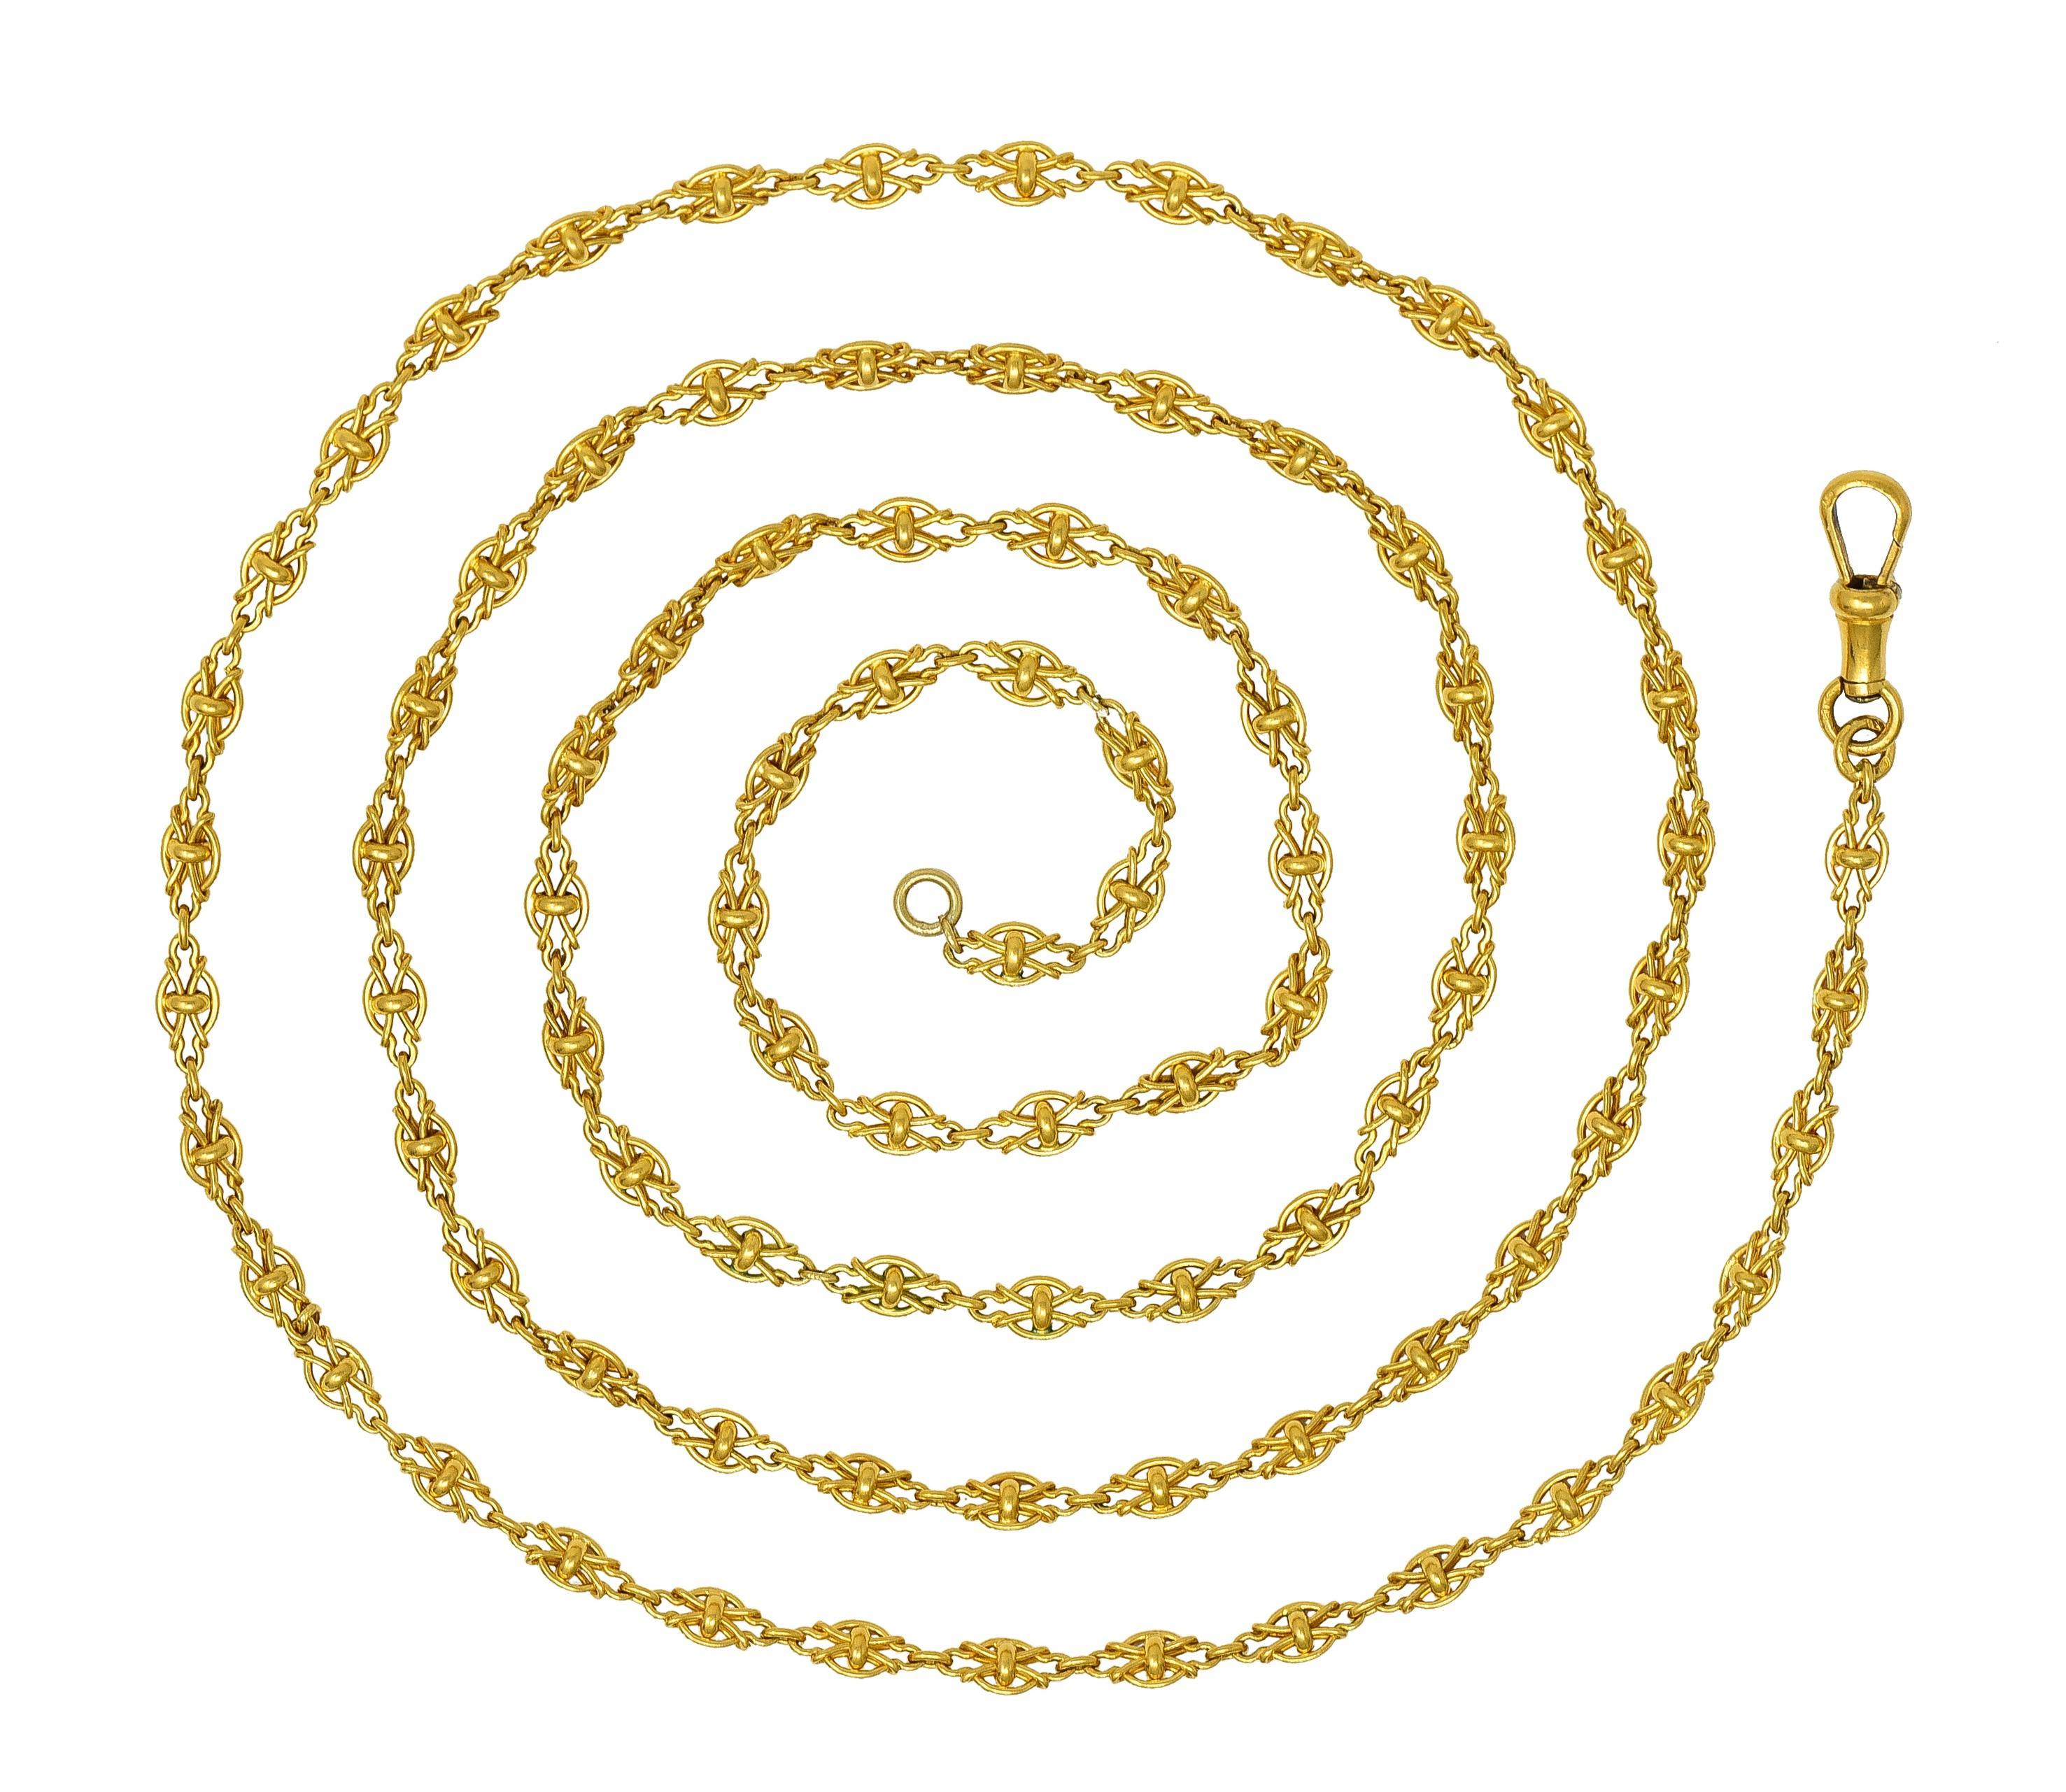 Comprised of knot-style links with single jump rings
Suspending a spinning dog clip clasp
Stamped with French hallmarks for 18 karat gold
Circa: 1870s
Width at widest: 5.0 mm 
Total length: 40.5 inches with clasp
Total weight: 41.0 grams
Stock